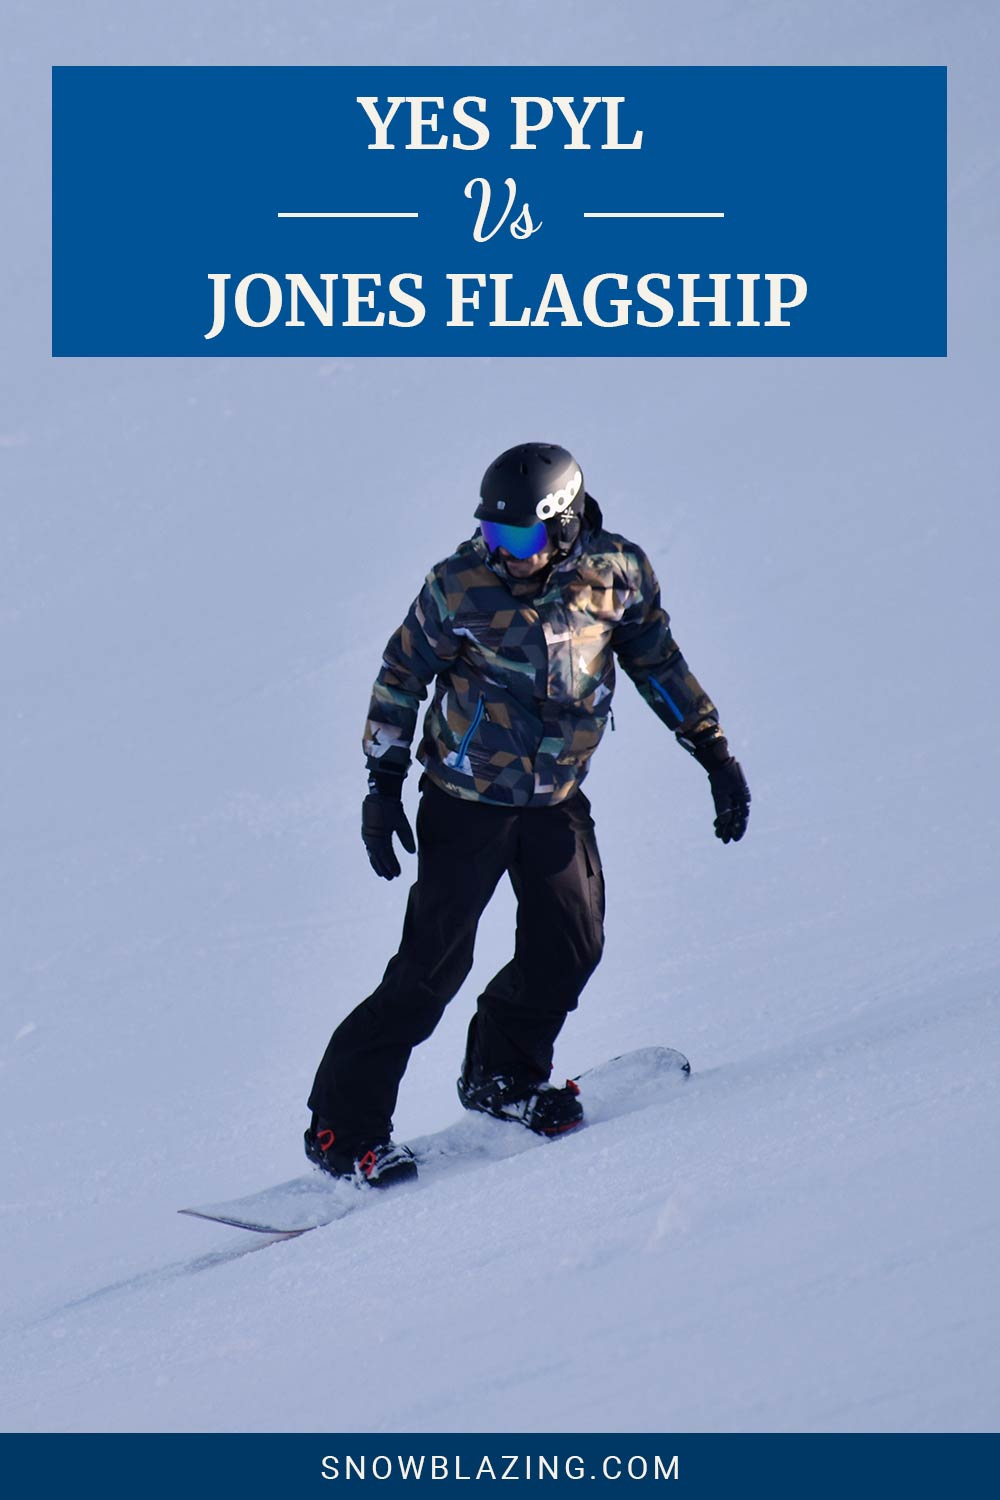 Man wearing blue goggles snowboarding - Yes PYL vs. Jones Flagship – Which Should You Ride?